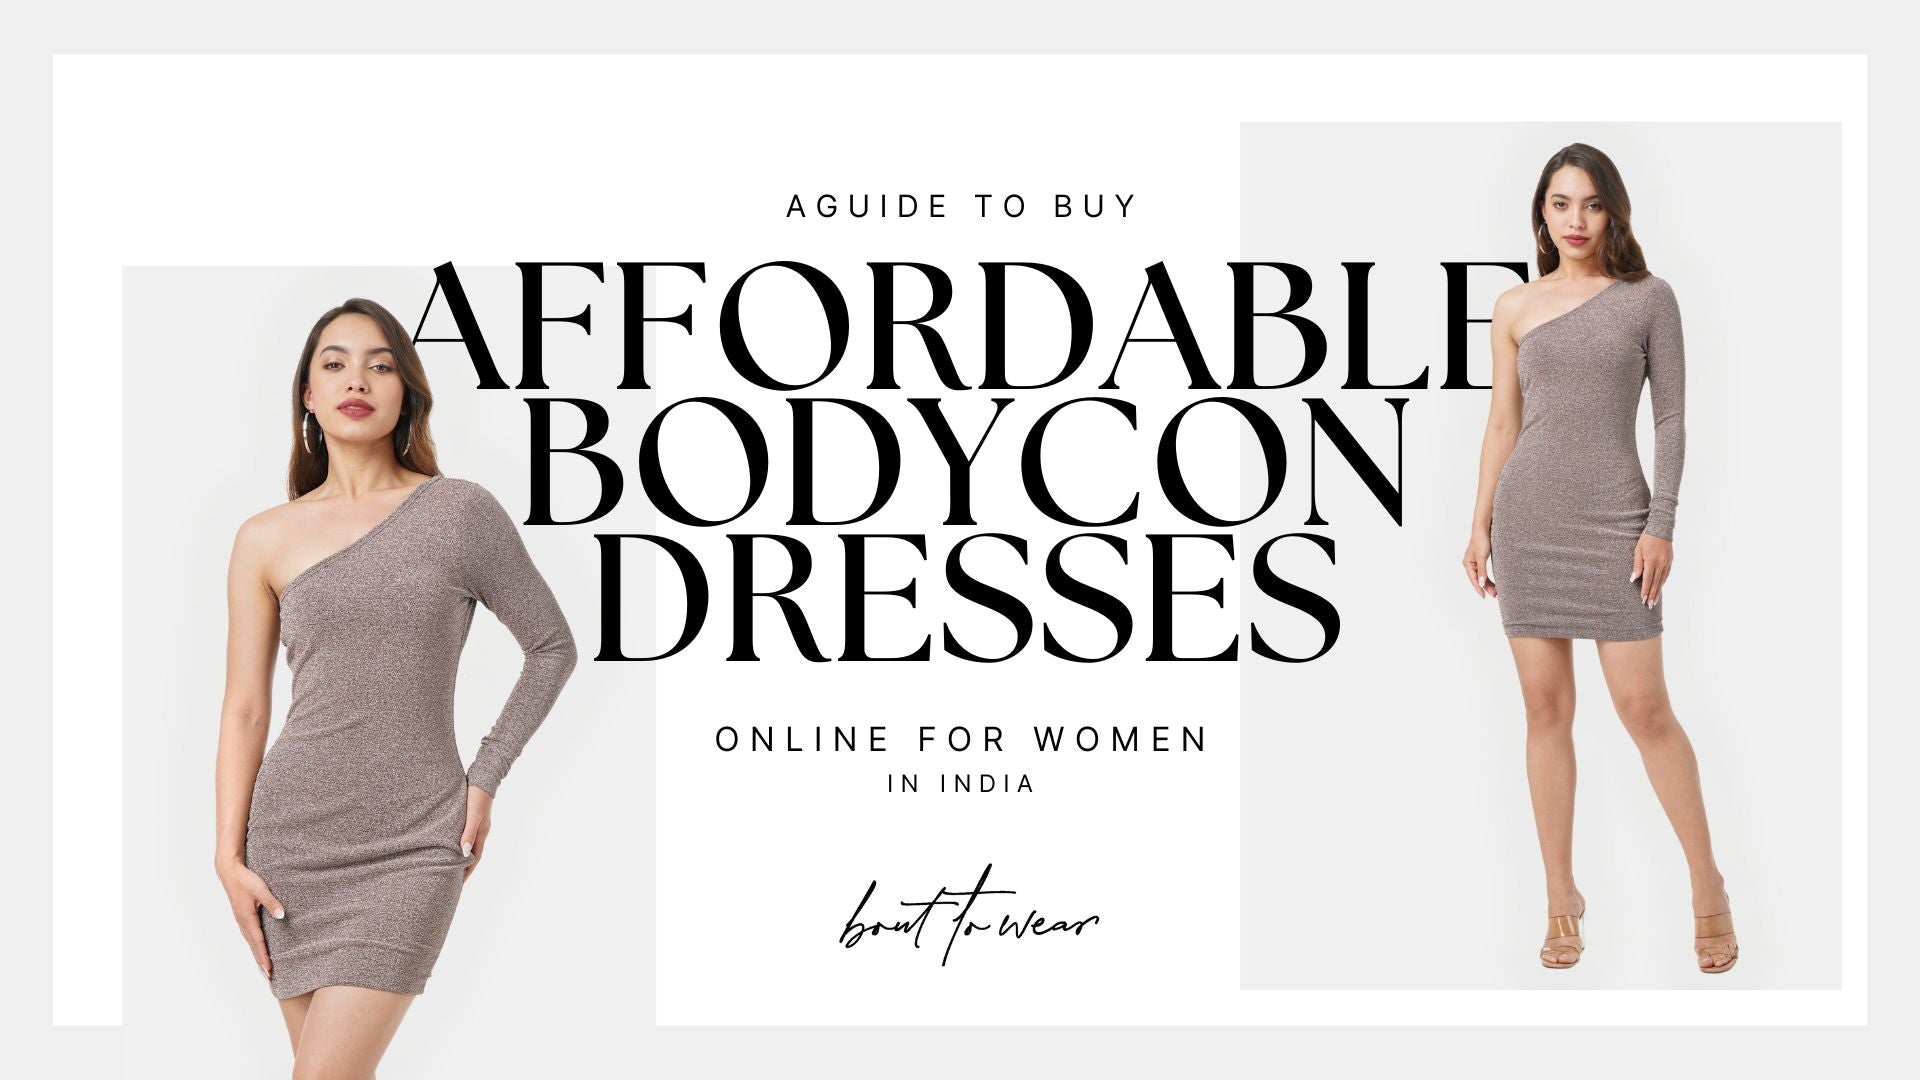 A Guide to Buying Affordable Bodycon Dresses Online for Women in India